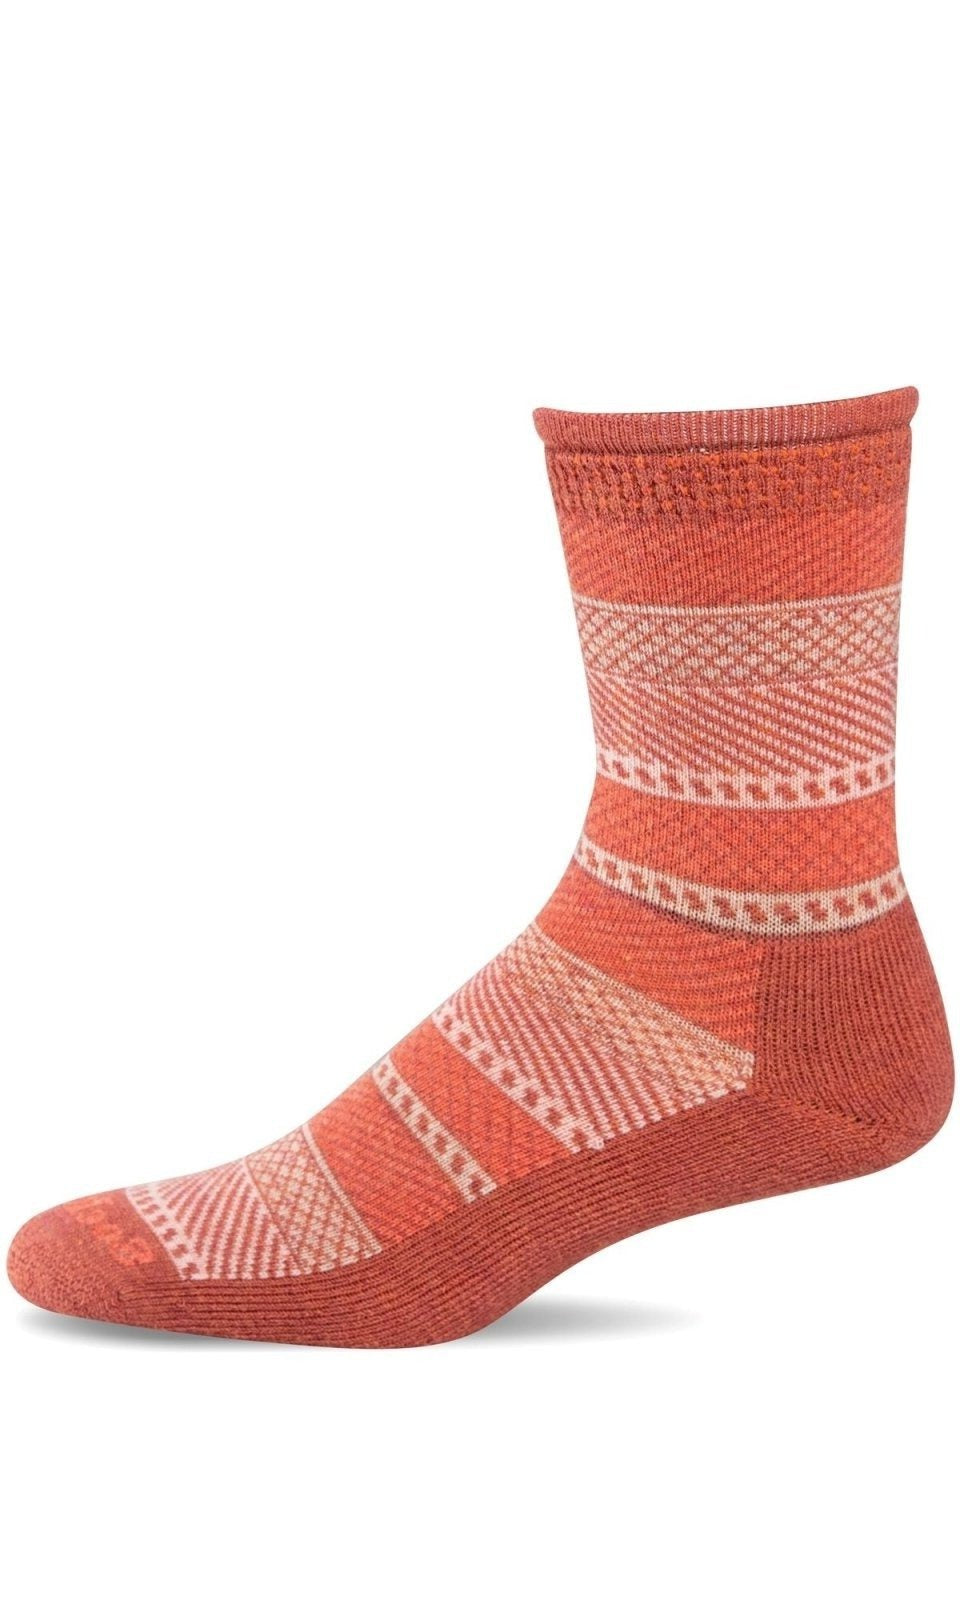 Lounge About | Red Rock - Socks - Sockwell